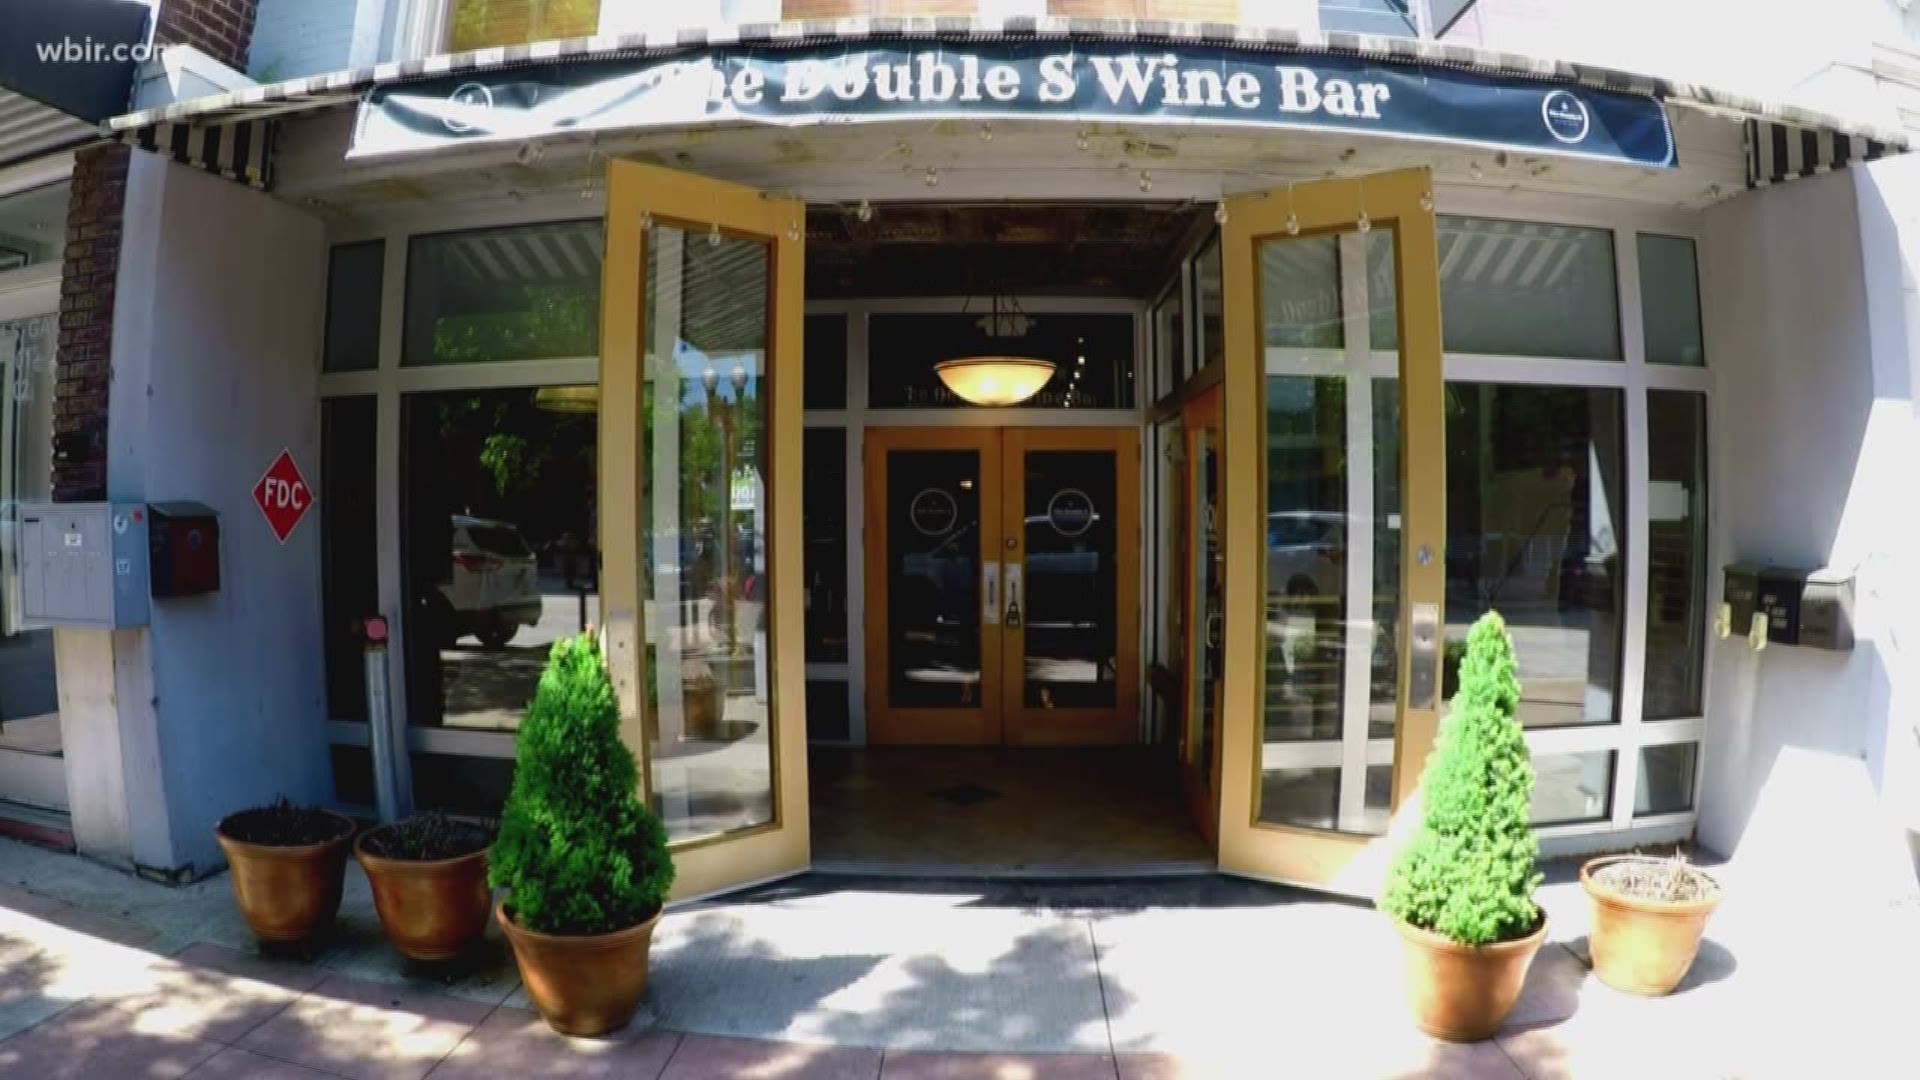 We explored a cool little place nestled in downtown Knoxville called the Double S Wine Bar. 
And come to find out, the owner has a whole world of wine knowledge from wine country and he loves to share it with his customers.